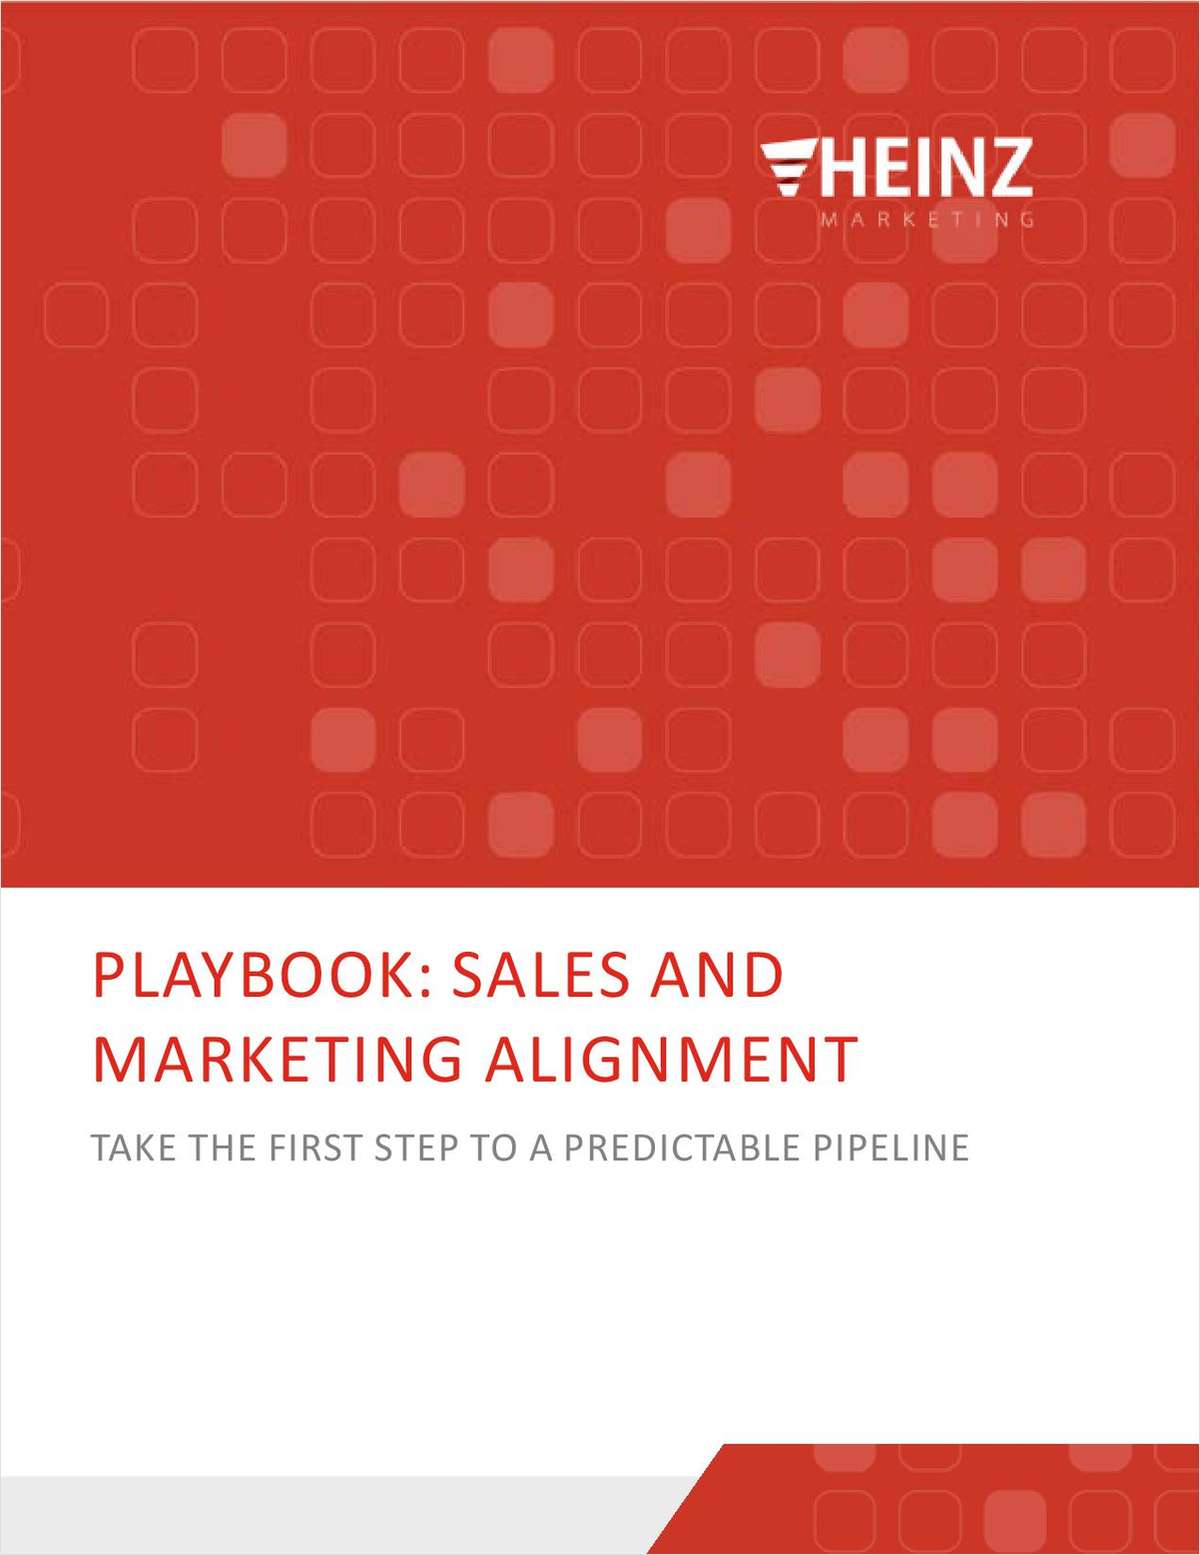 Playbook: Sales and Marketing Alignment